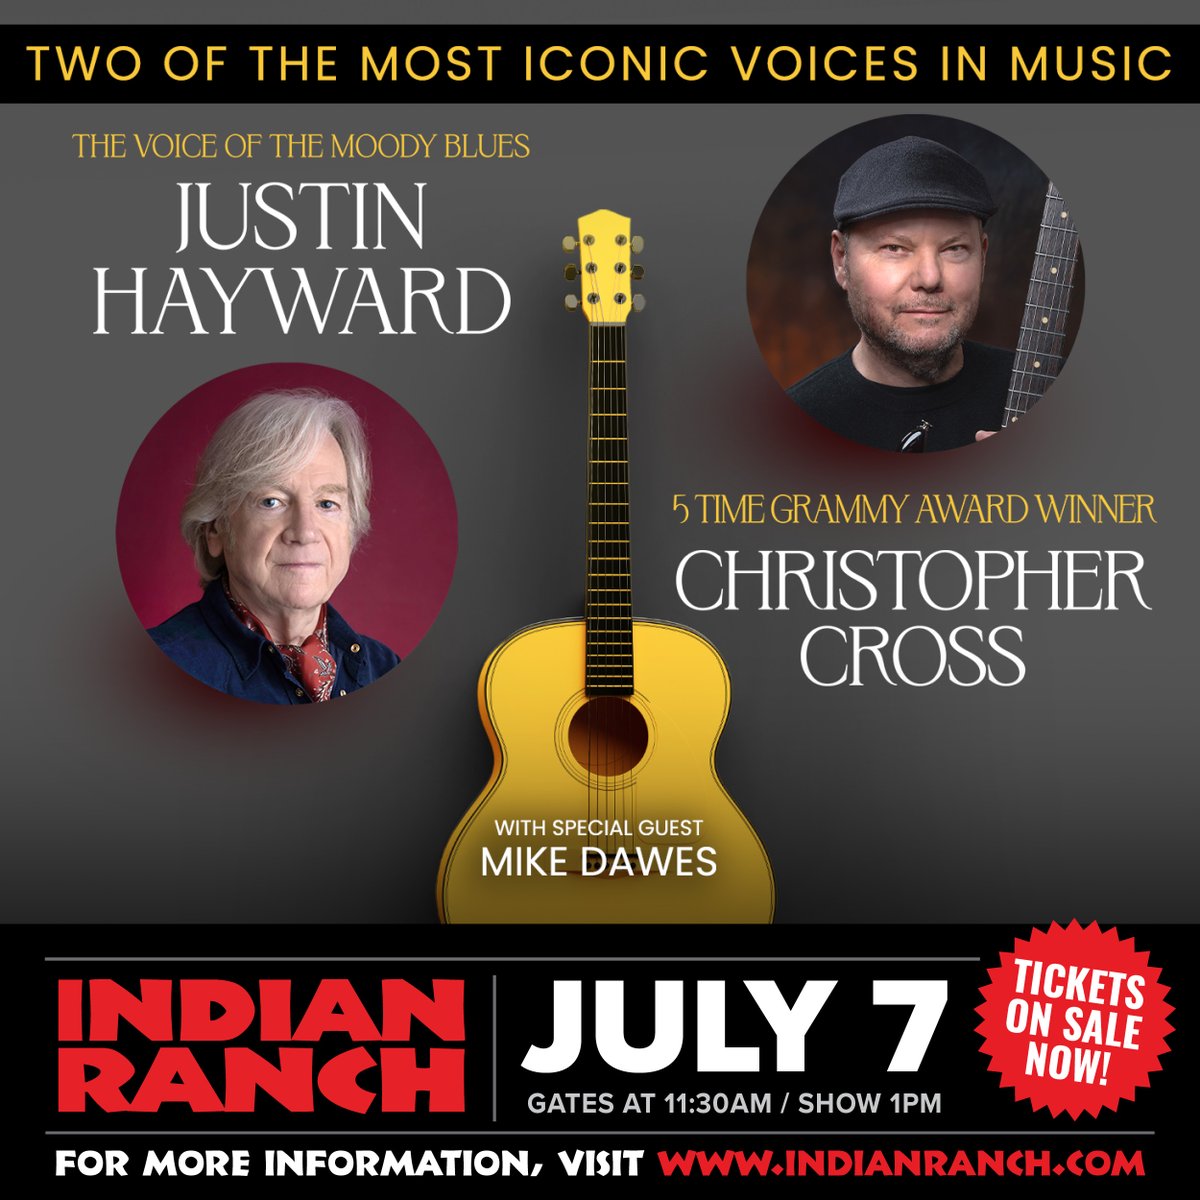 Don't miss two of the most iconic voices in music, Justin Hayward and Christopher Cross, perform at Indian Ranch on July 7th! Buy your tickets now at indianranch.com🎫
·
·
#justinhayward #christophercross #livemusic #concert #show #event #entertainment #indianranch